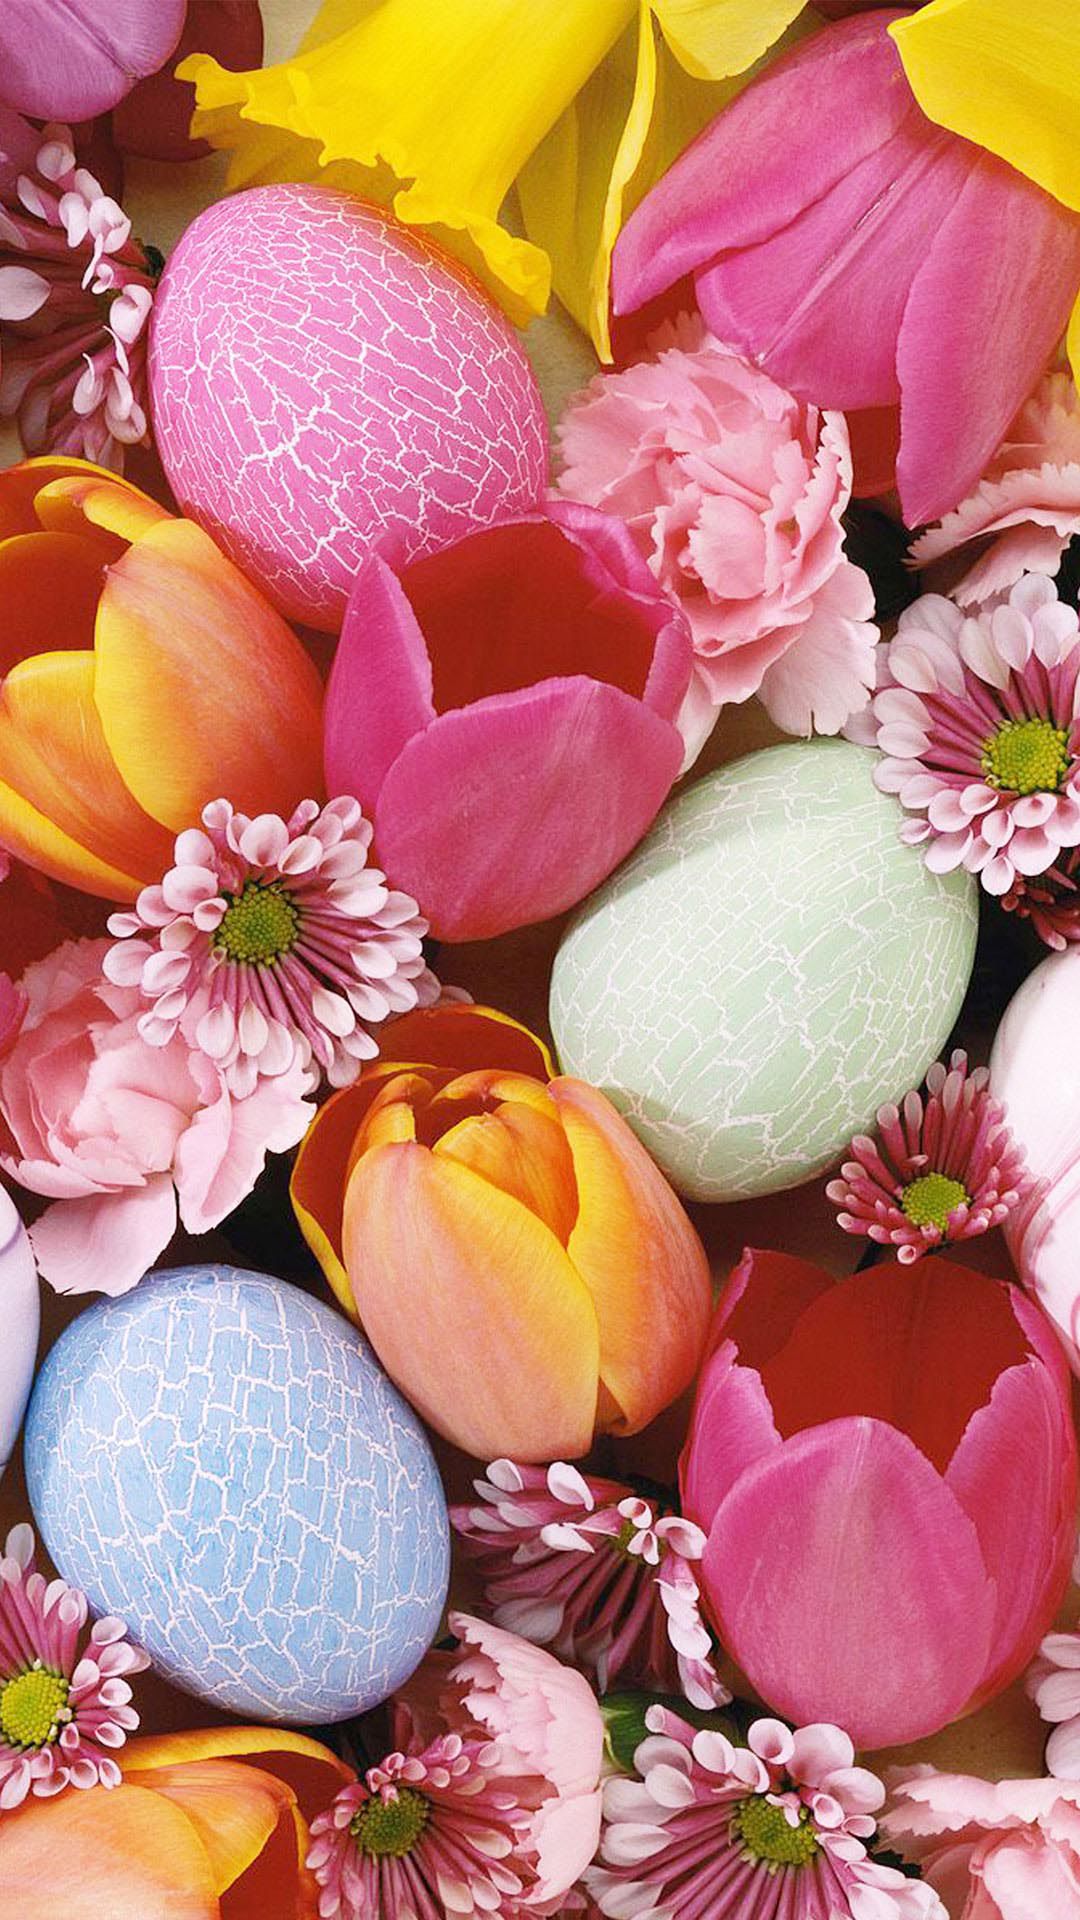 Pink Flowers And Eggs Background Android Wallpaper free download